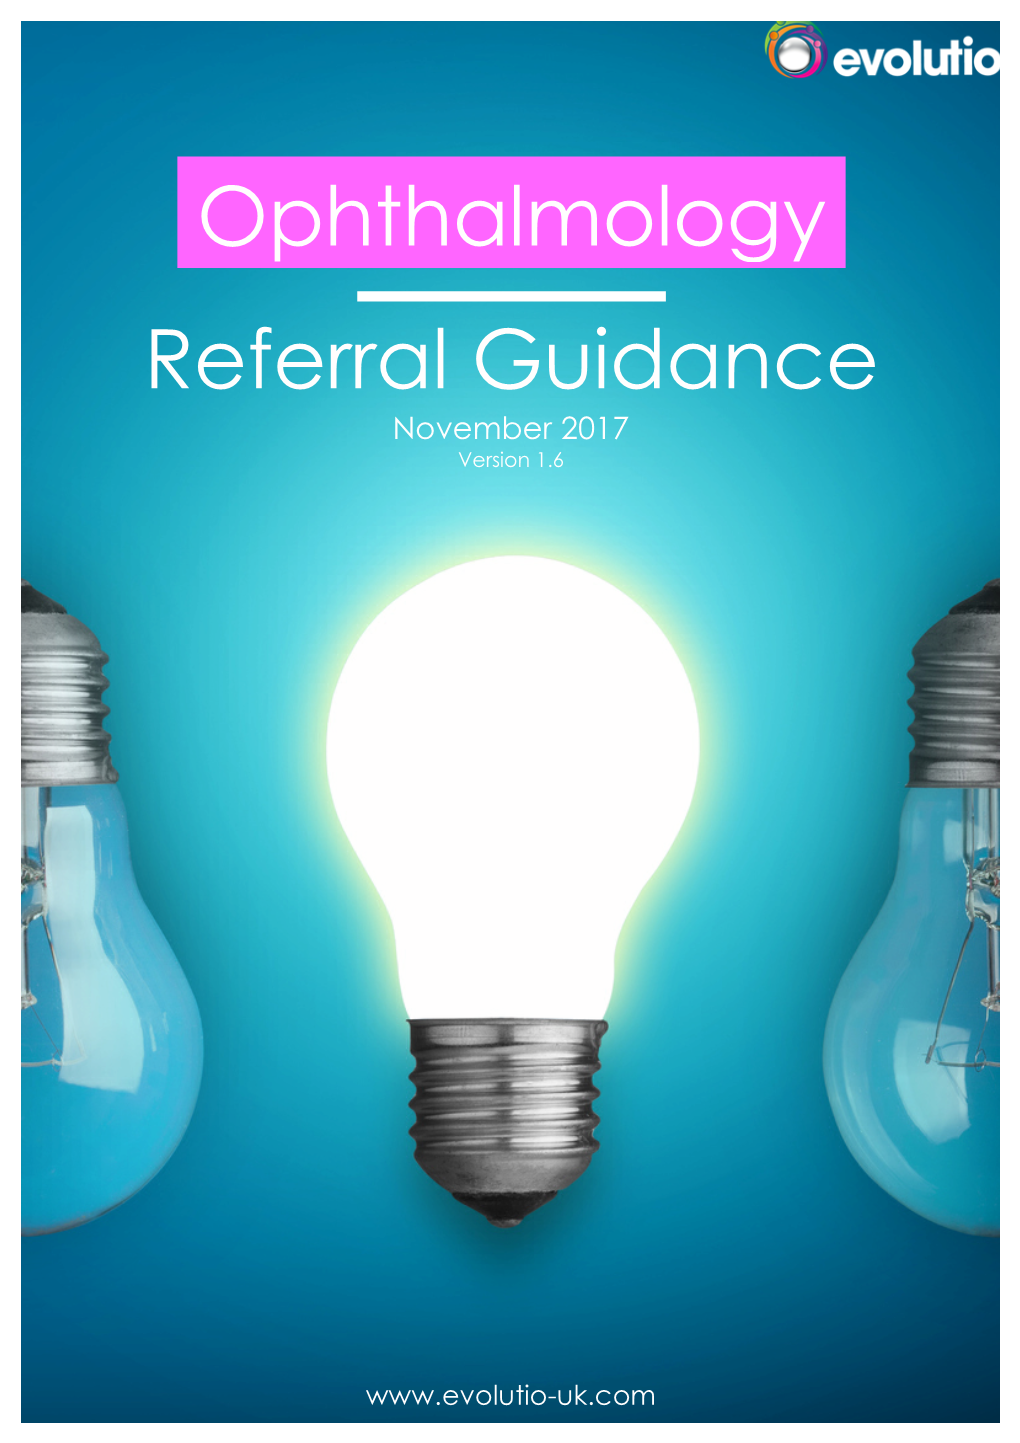 Referral Guidance Ophthalmology